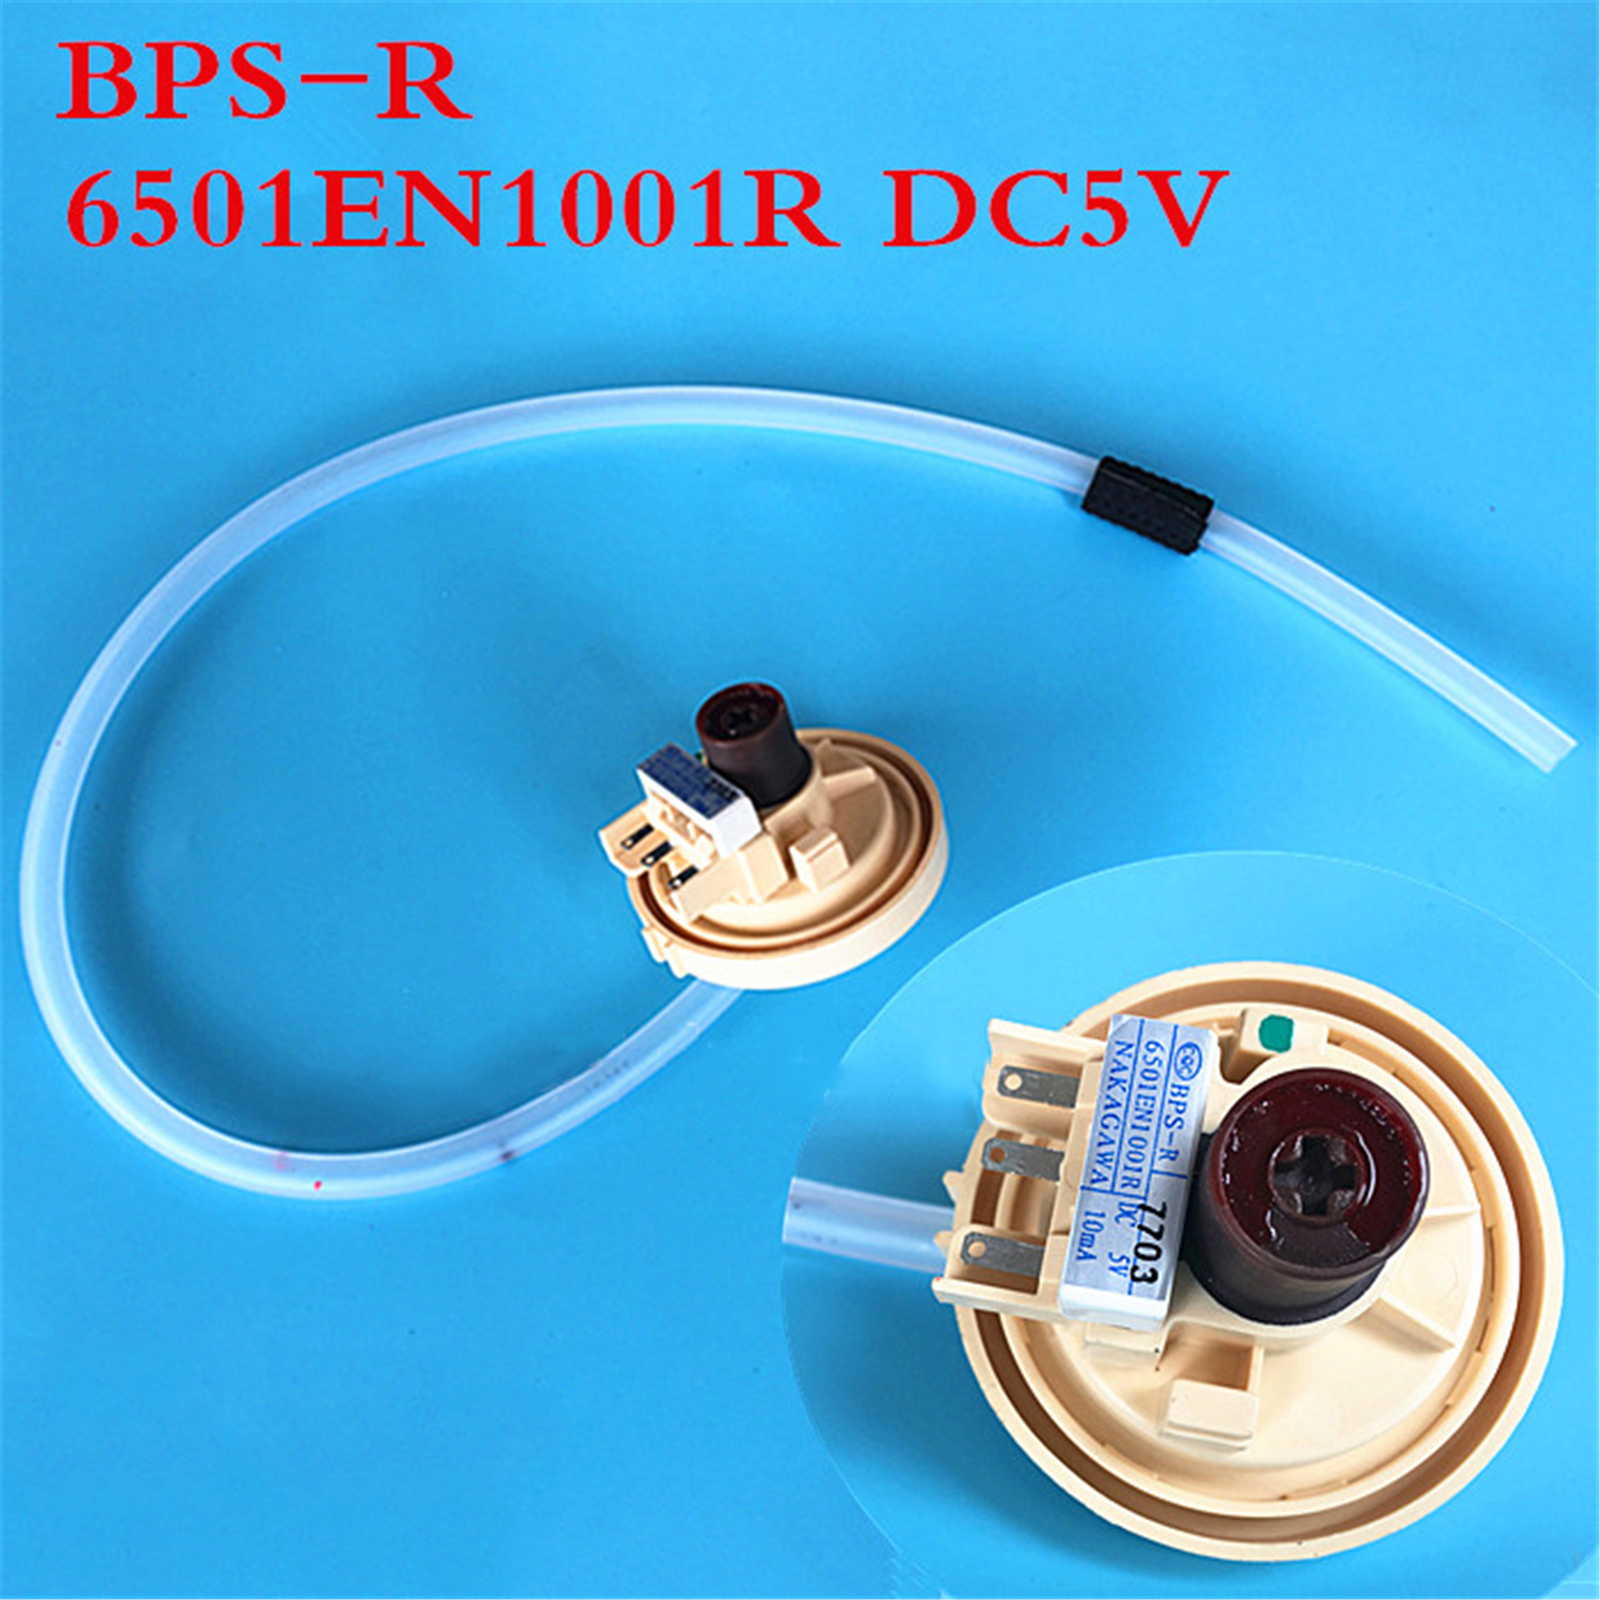 Water Level Pressure Switch for LG Automatic Washing Machine BPS-R 6501EA1001R Controller Sensor Switch Replacement Parts